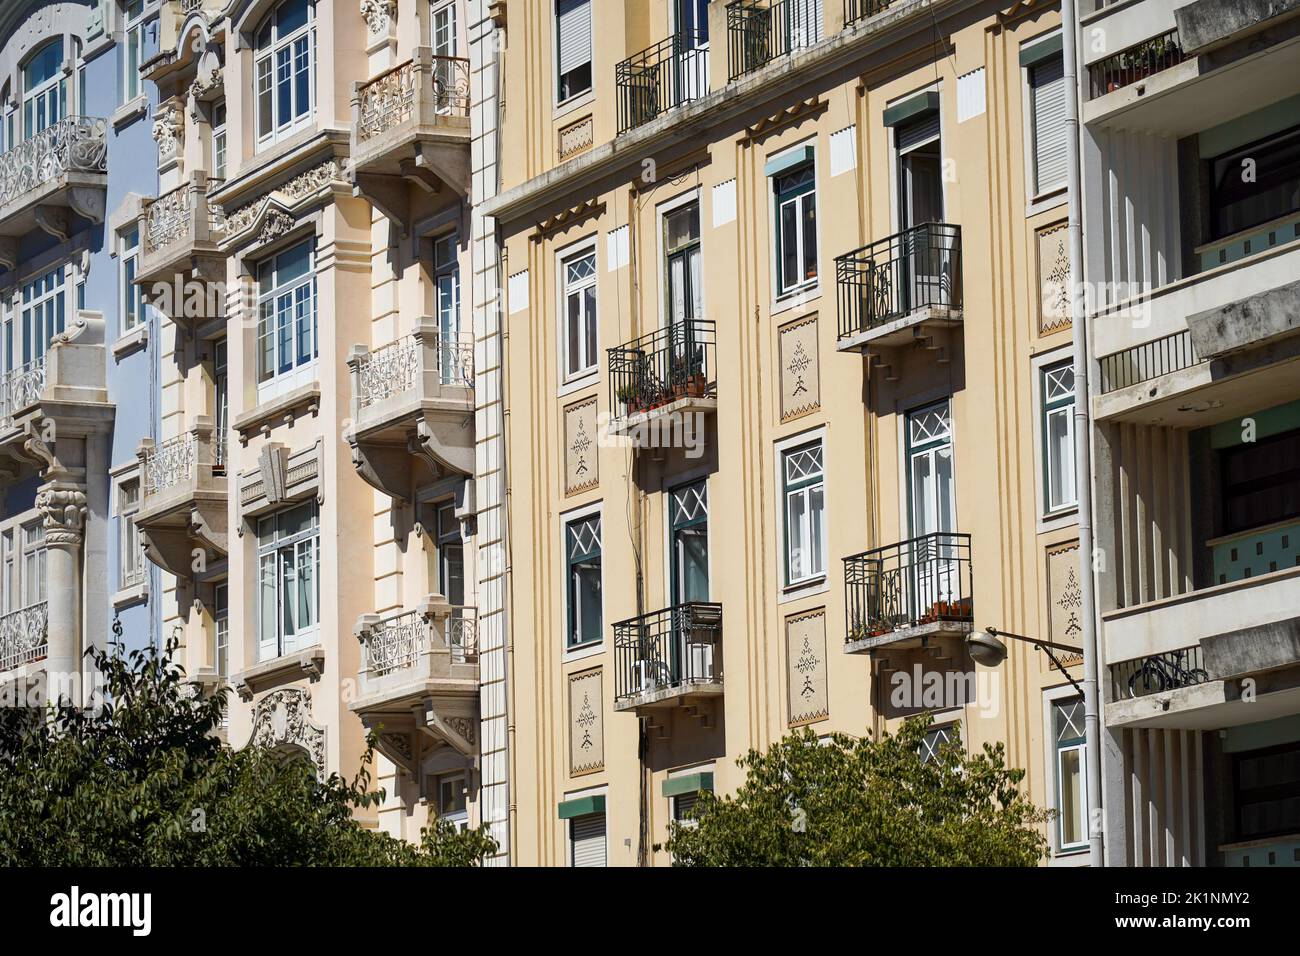 Beautiful Lisbon apartments facades, with old windows and balconies. European architecture Stock Photo